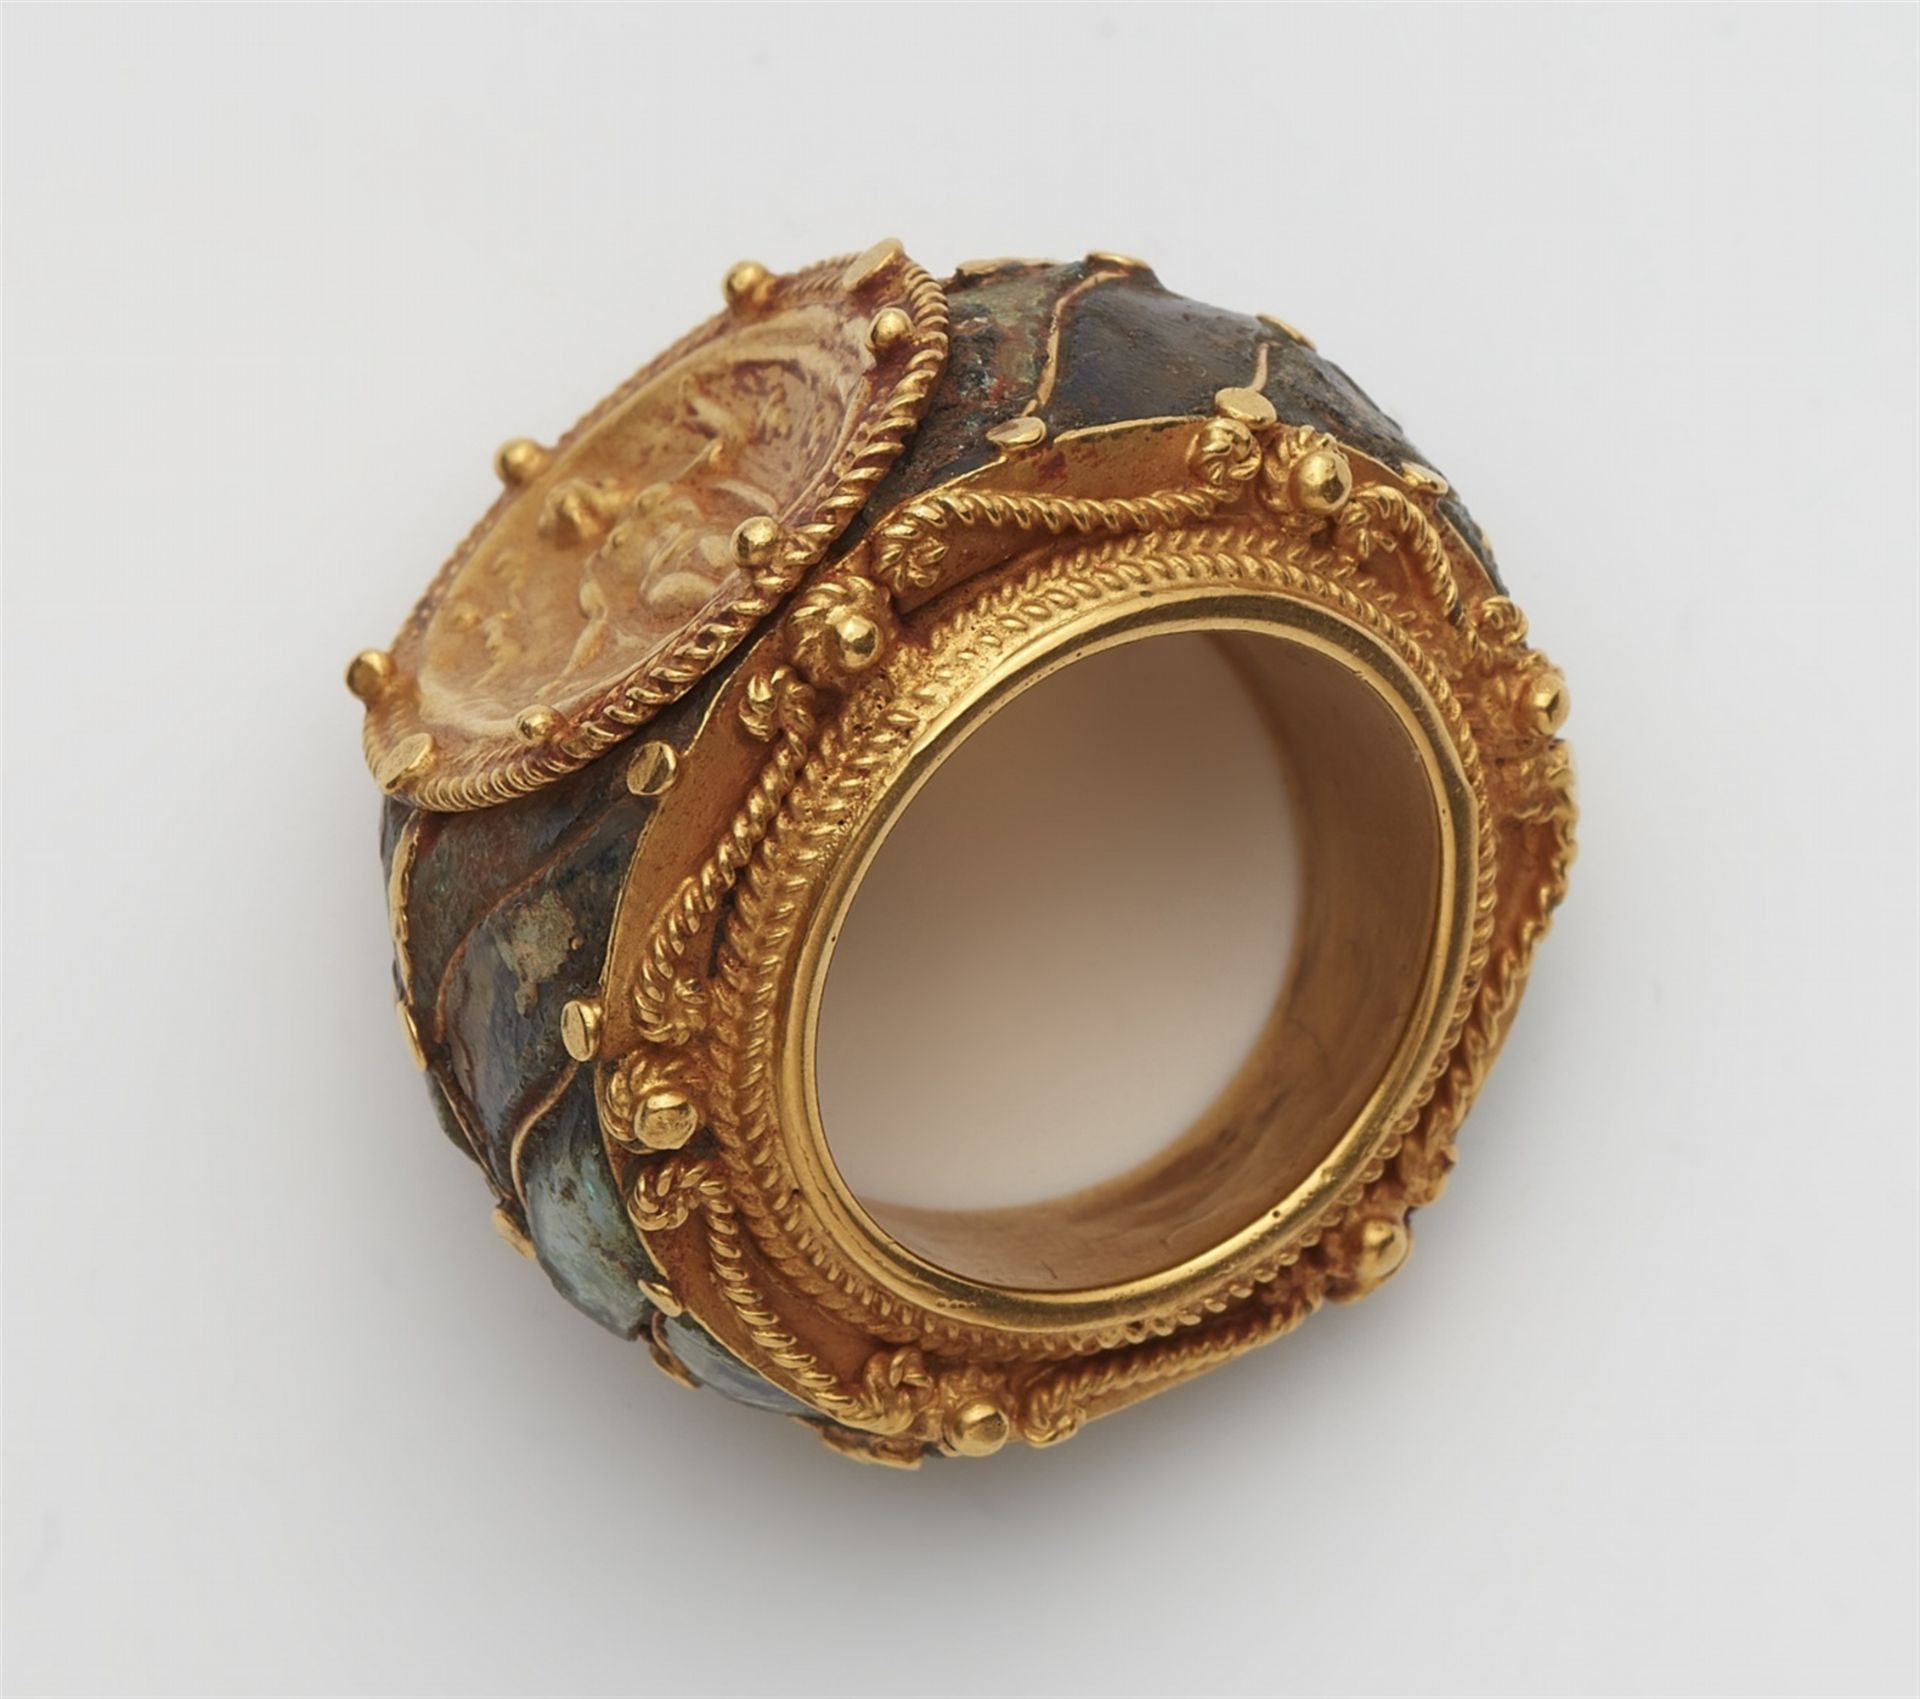 A 22k gold Historicist ring with Roman glass mosaic - Image 2 of 3